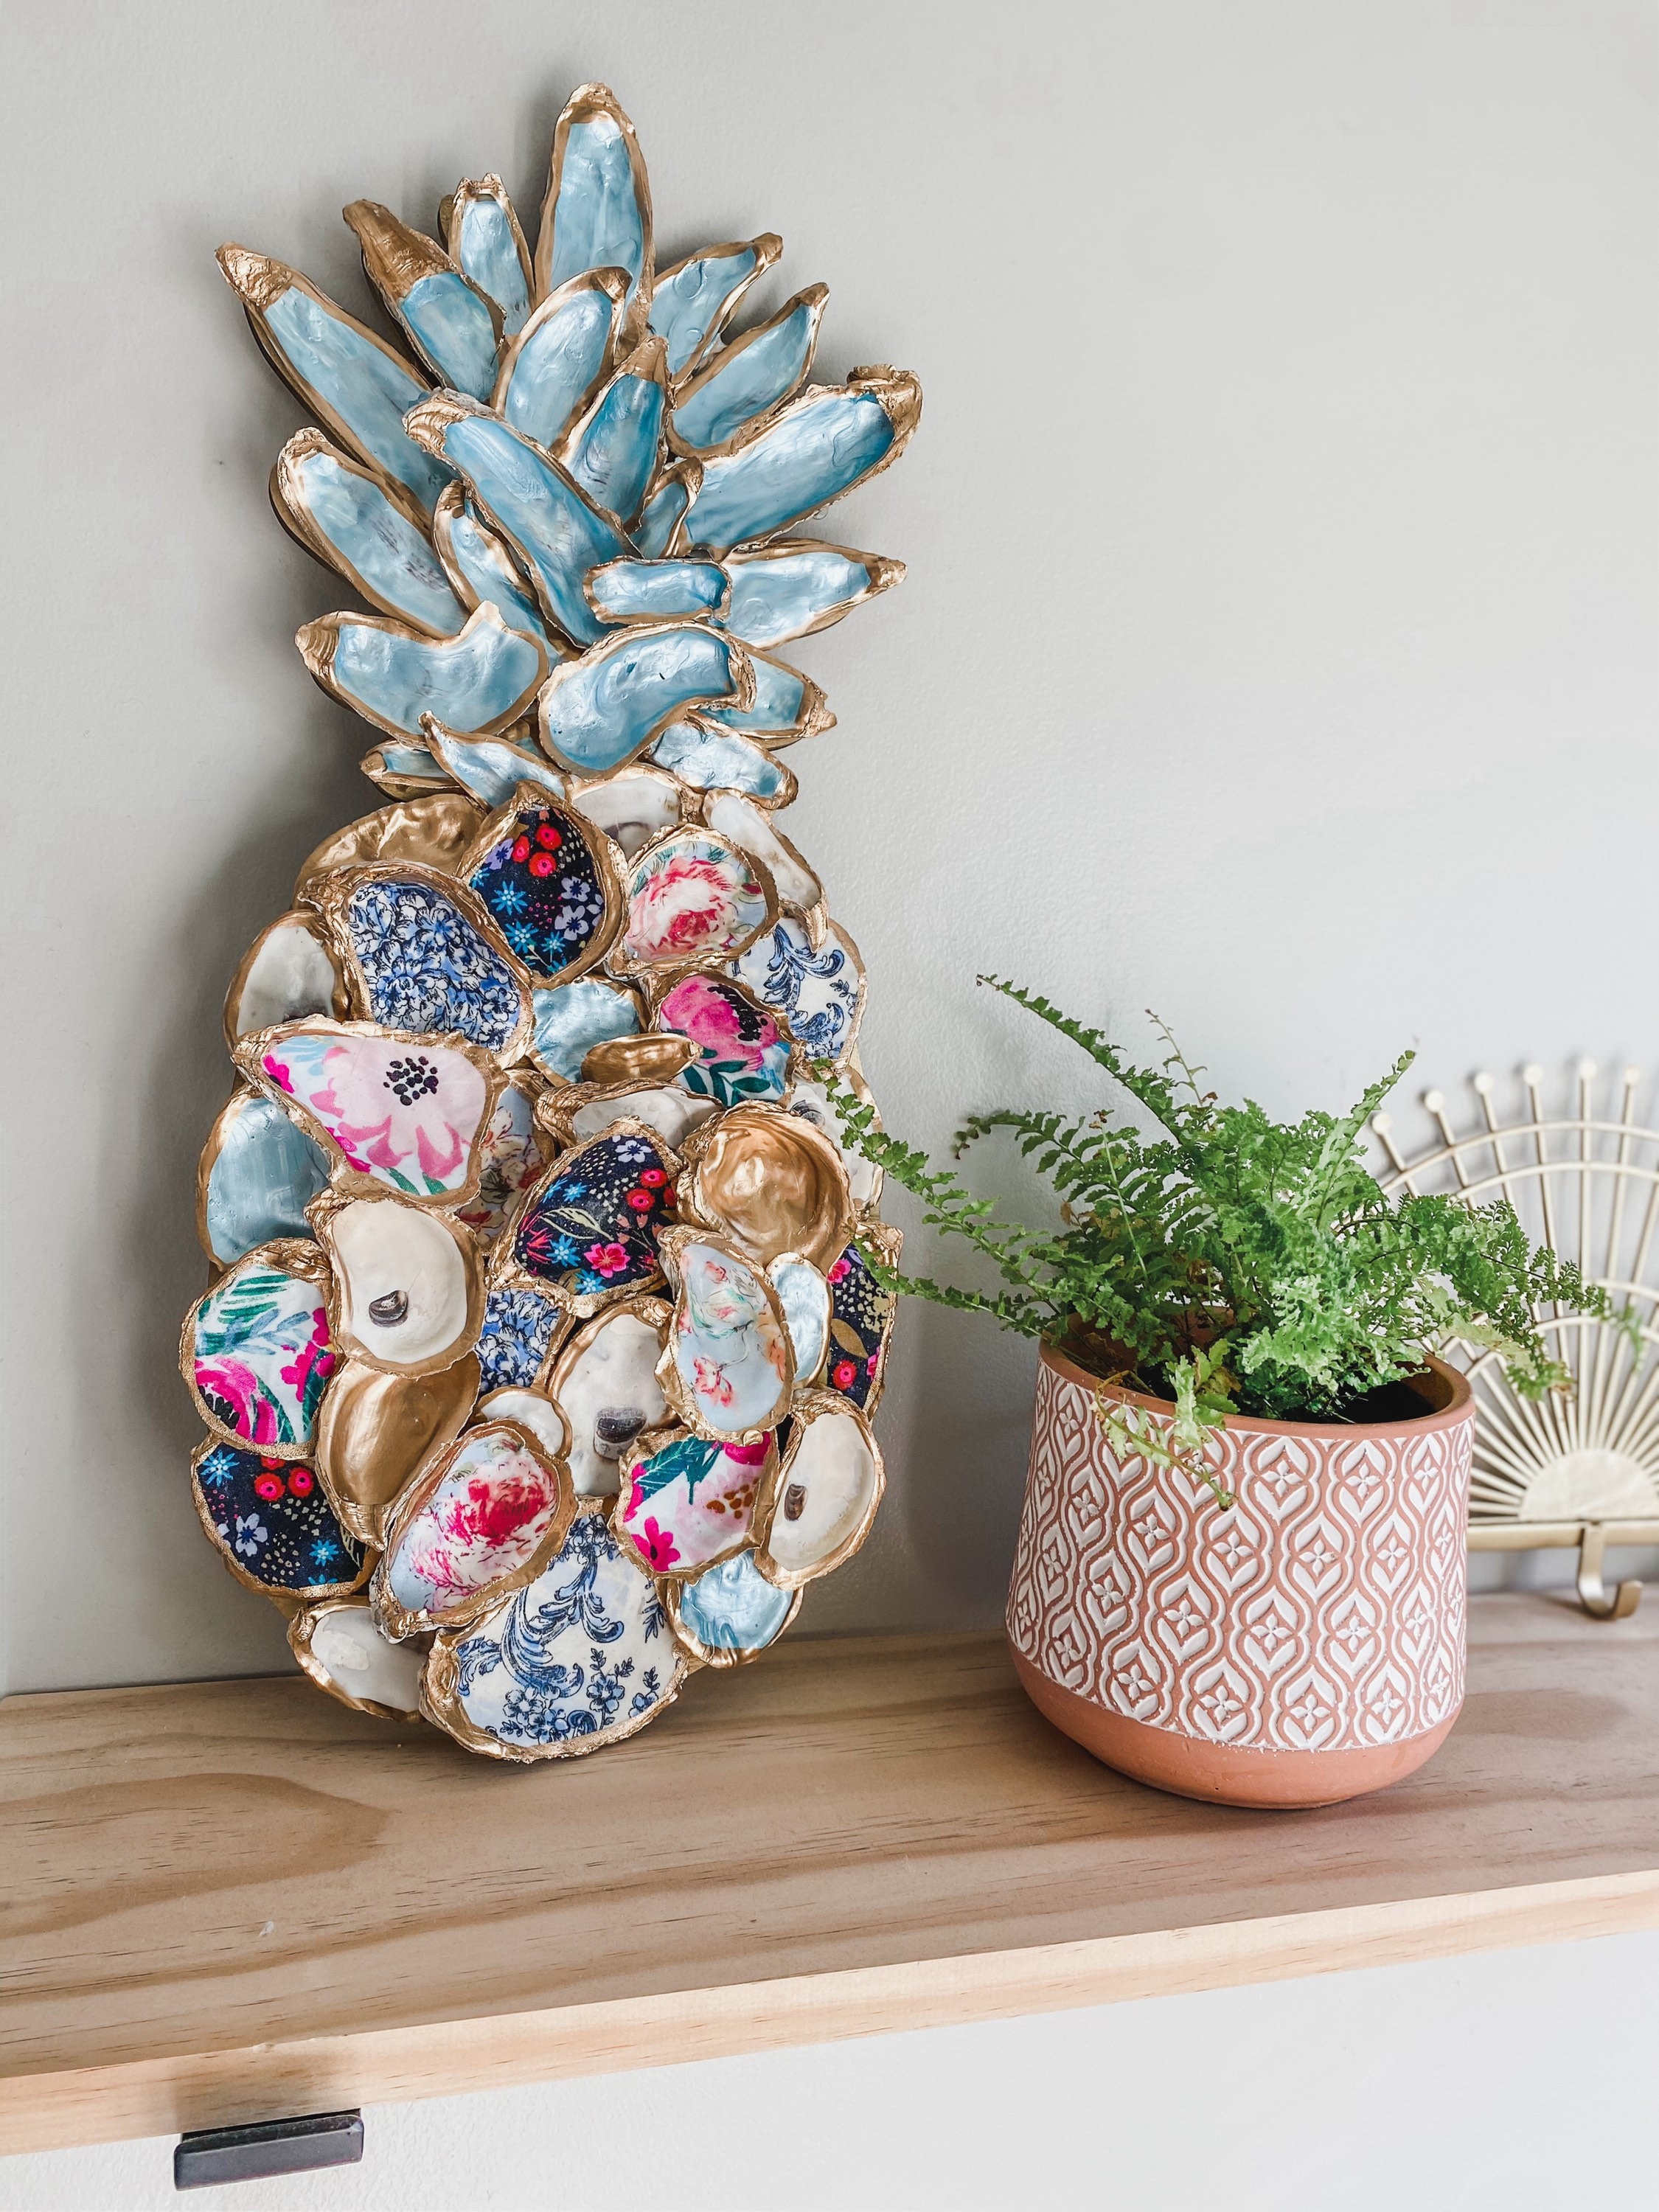 21 Simple Ways To Decorate With Shells - Home with Heather